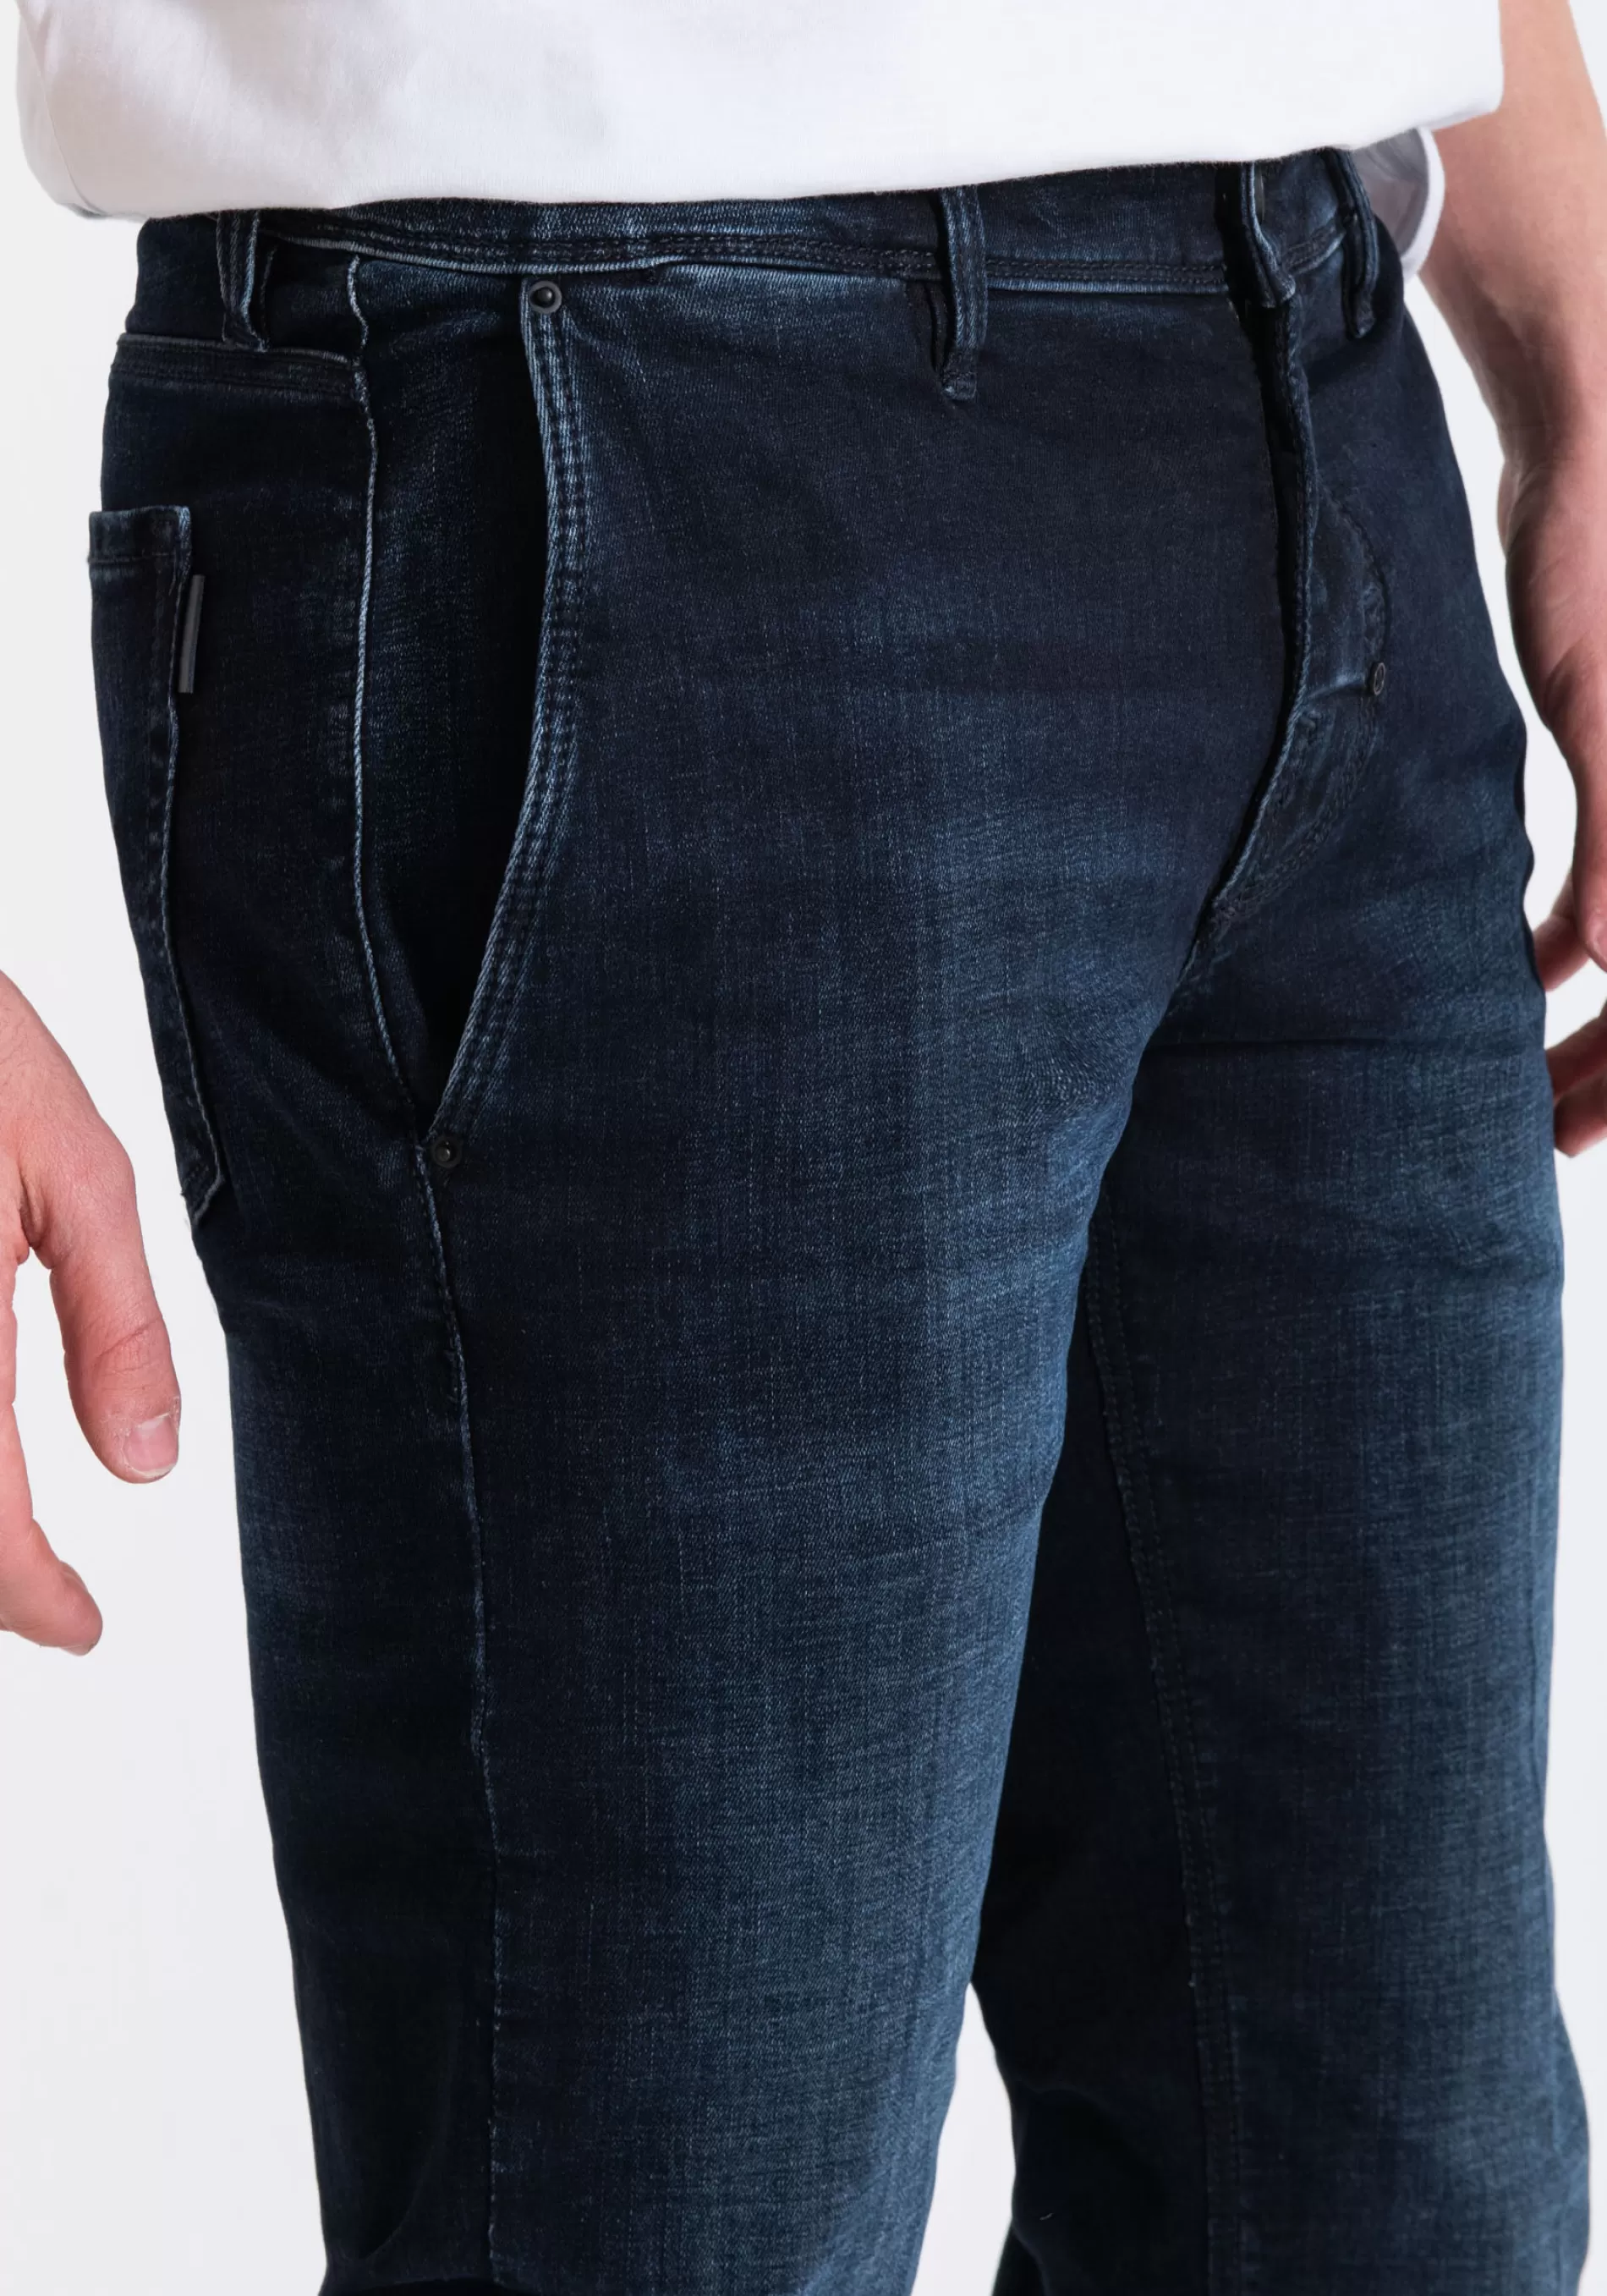 Store "MASON" SKINNY FIT JEANS IN BLUE POWER STRETCH DENIM WITH DARK WASH Skinny Fit Jeans